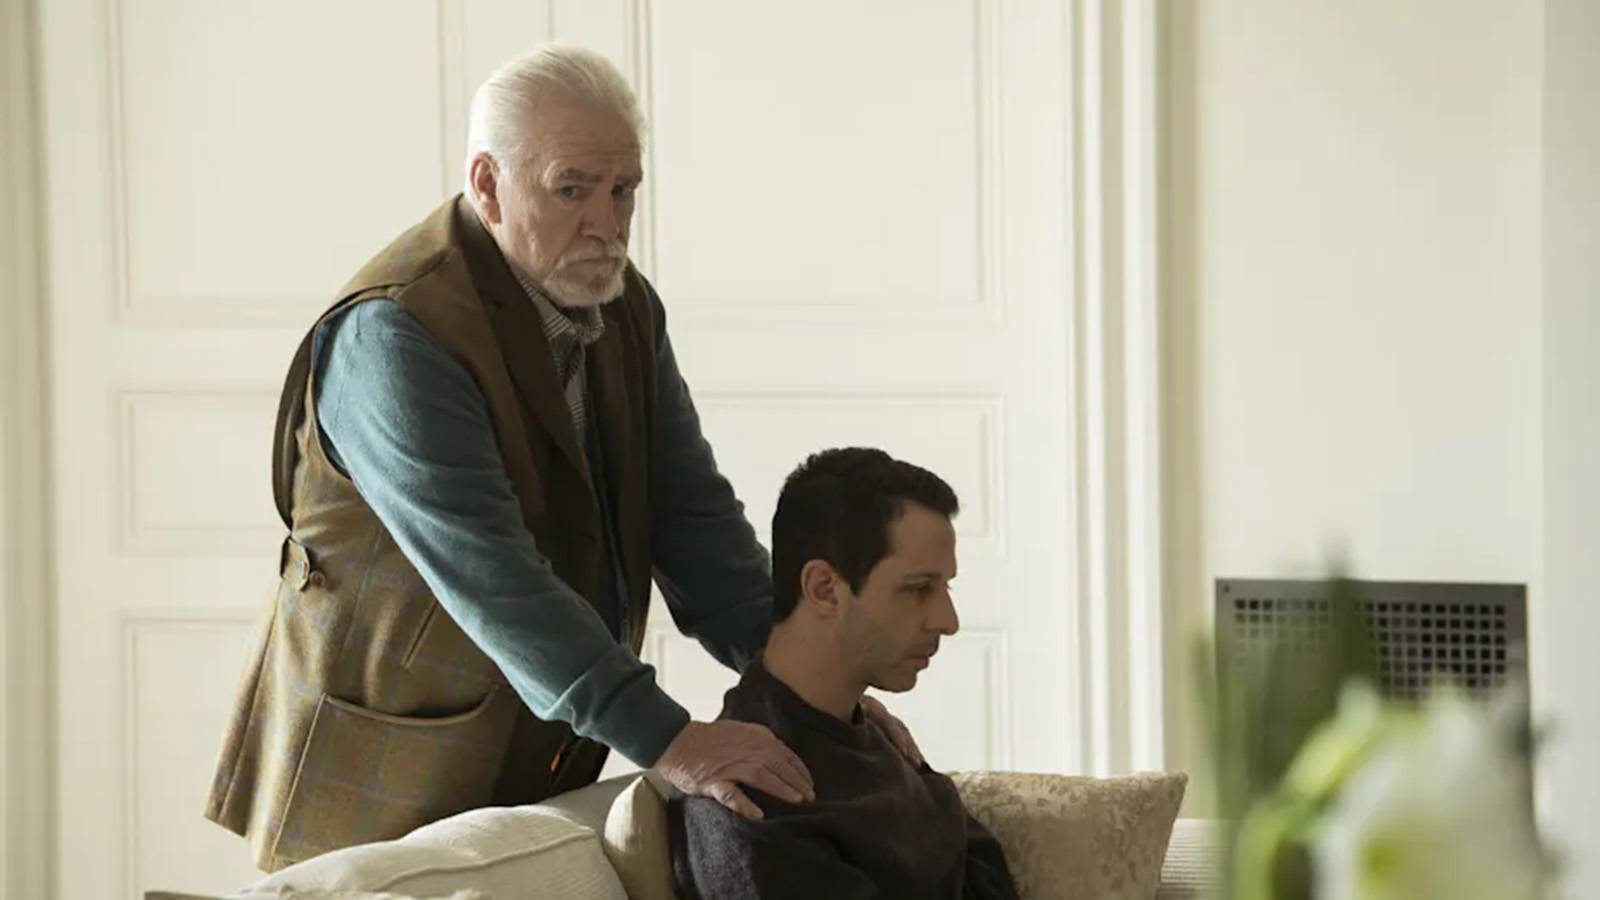 Scene from HBO television show "Succession"